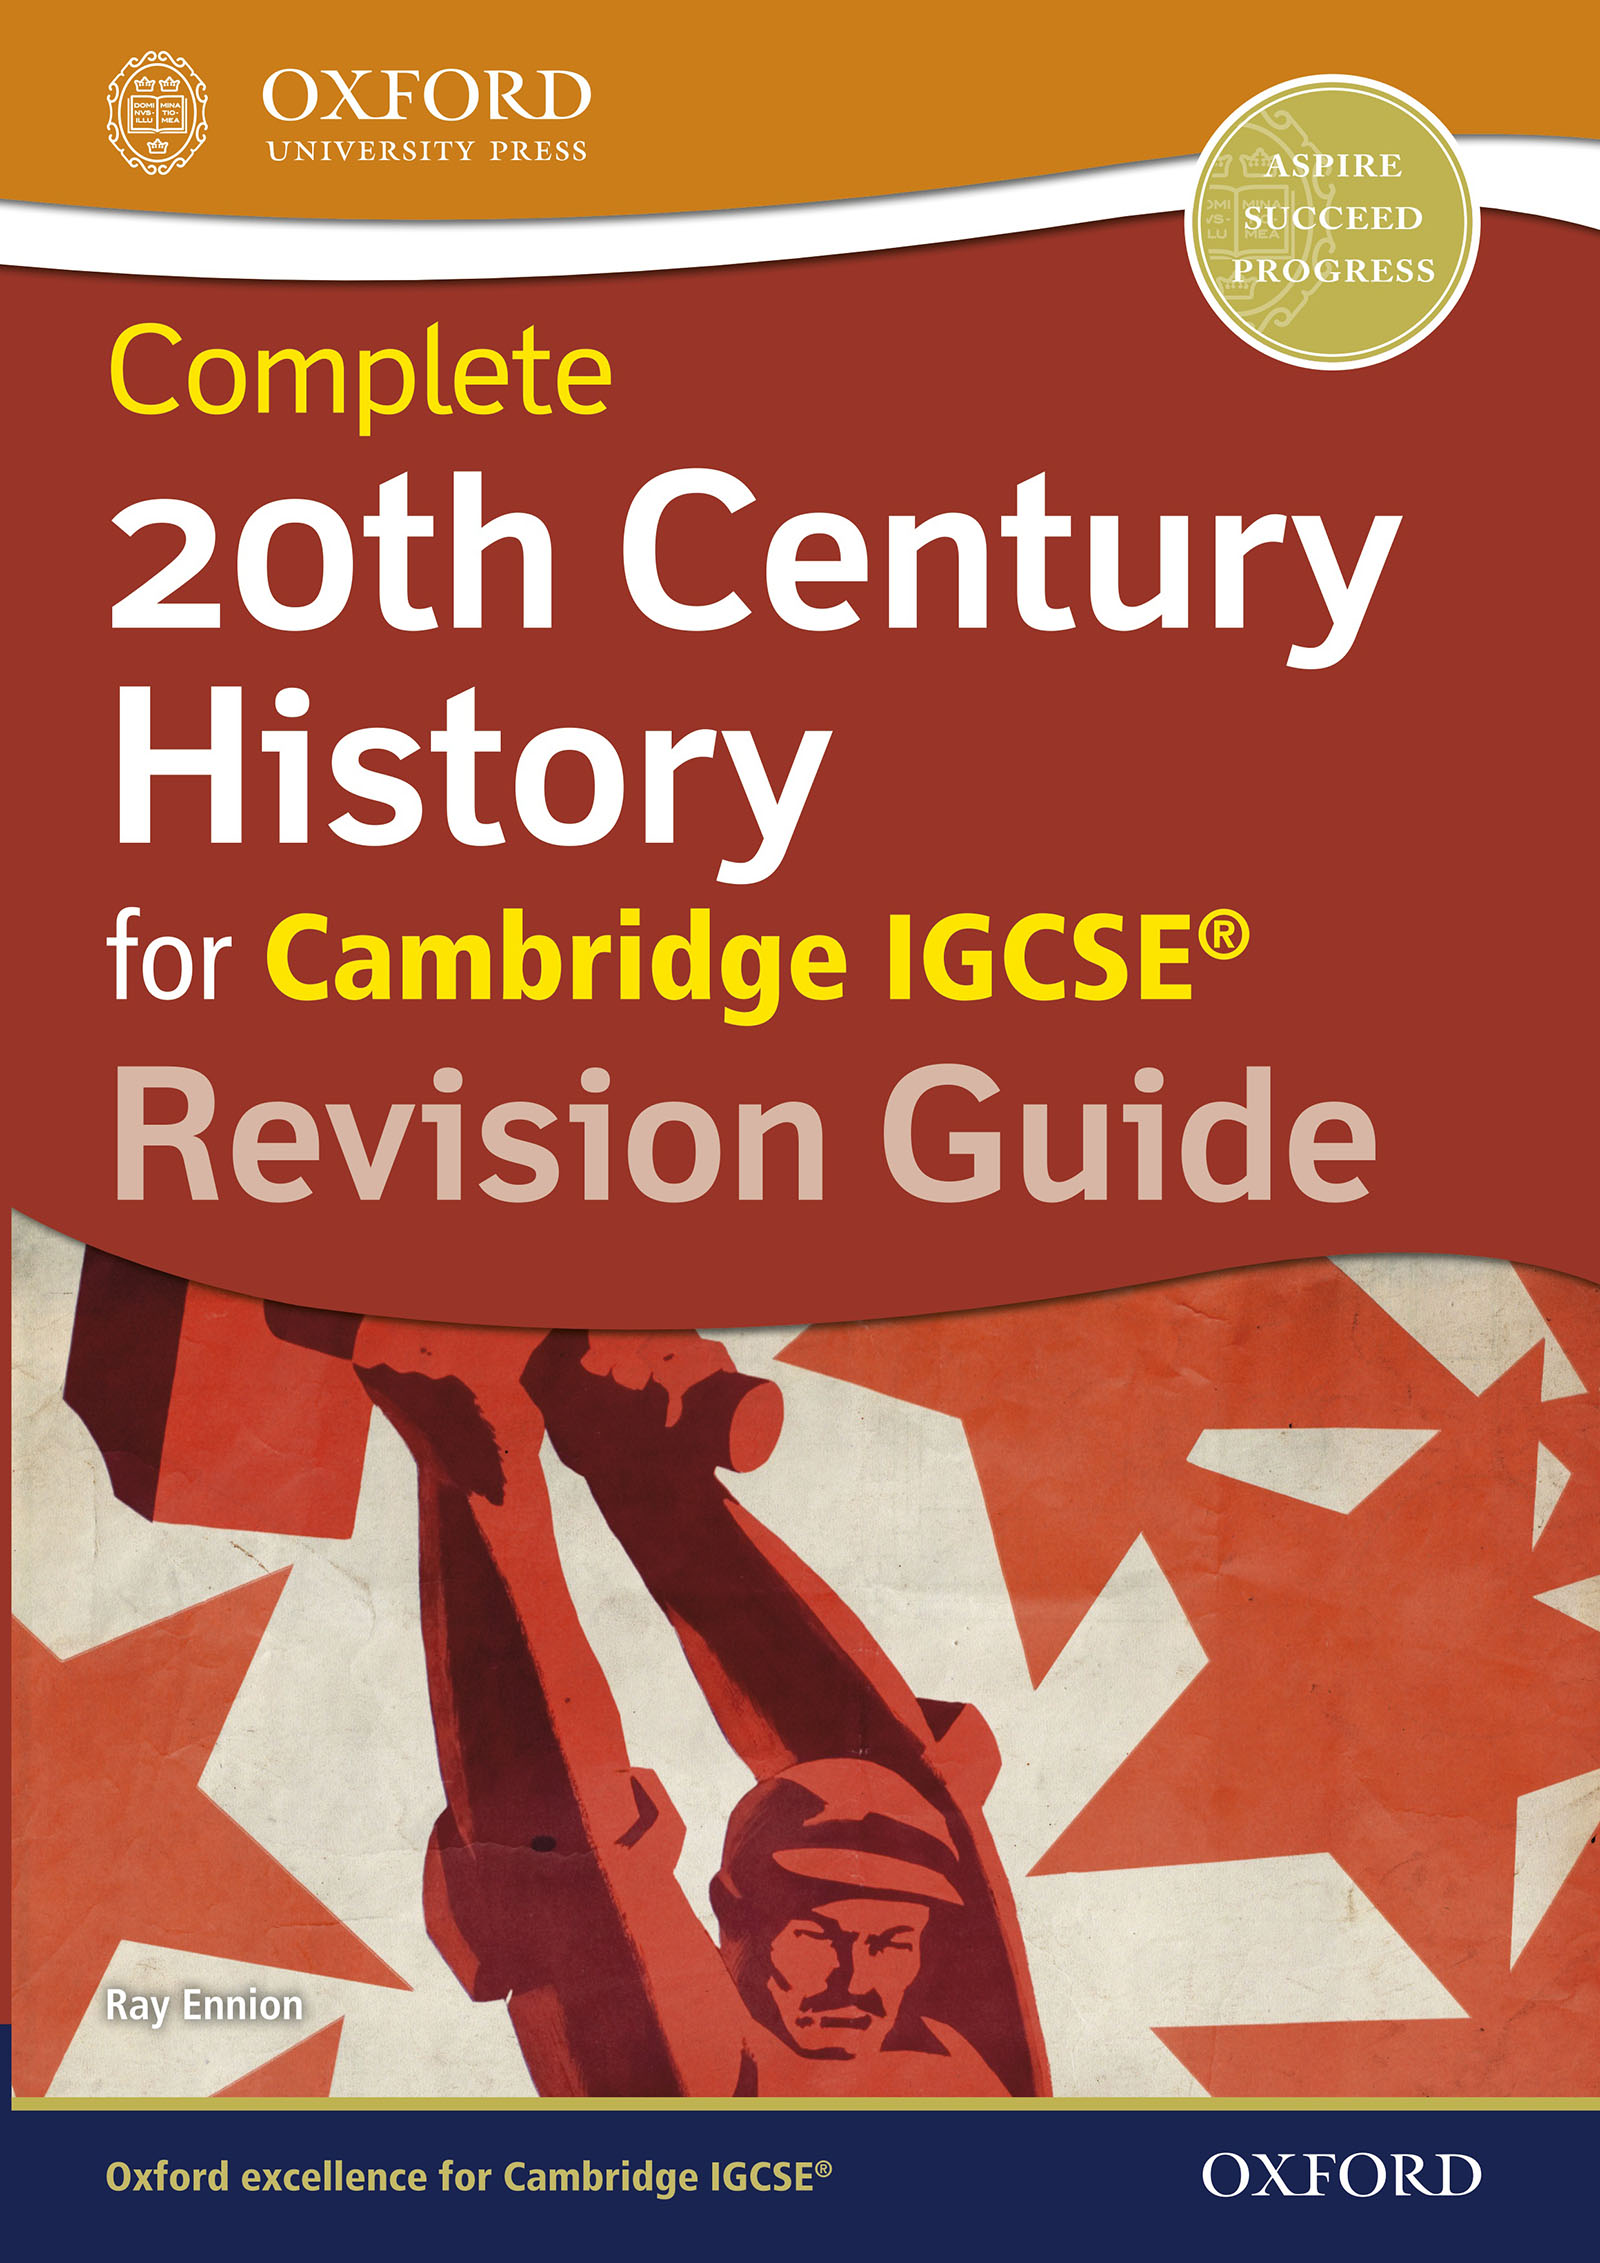 Complete 20th Century History for Cambridge IGCSE Revision Guide